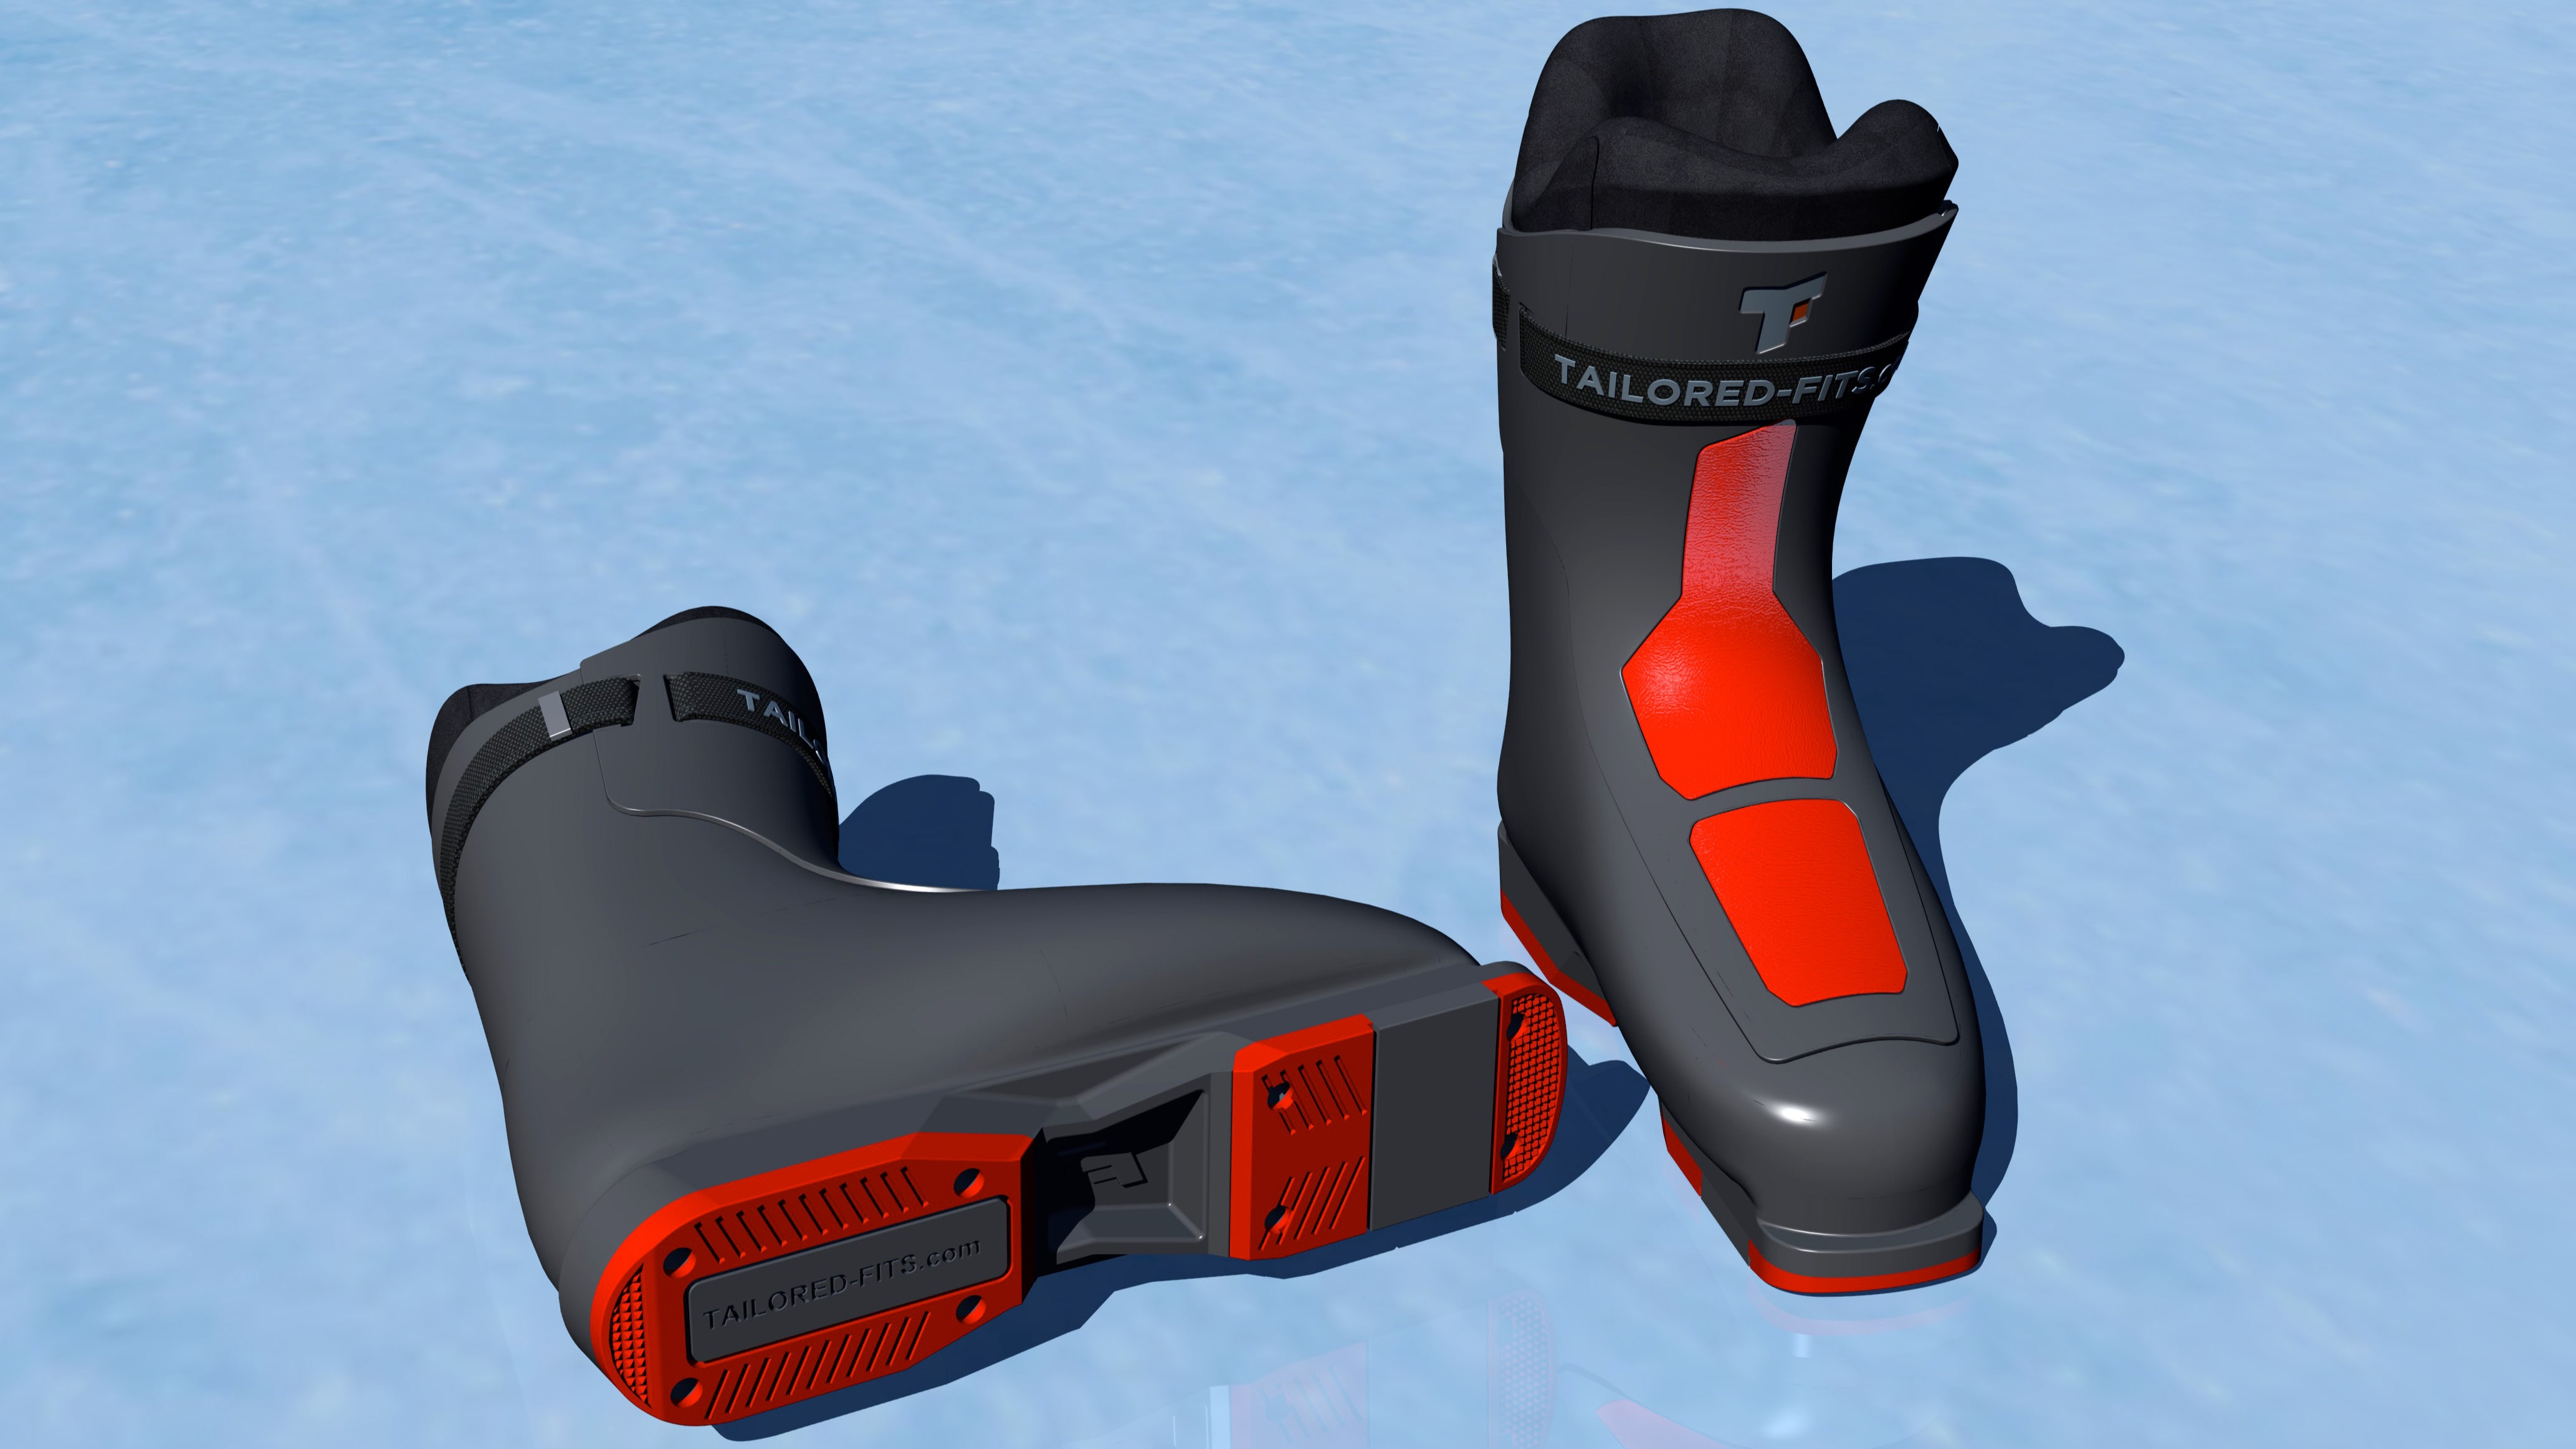 Tailored Fits ski boot insole, final prototype render © Tailored Fits